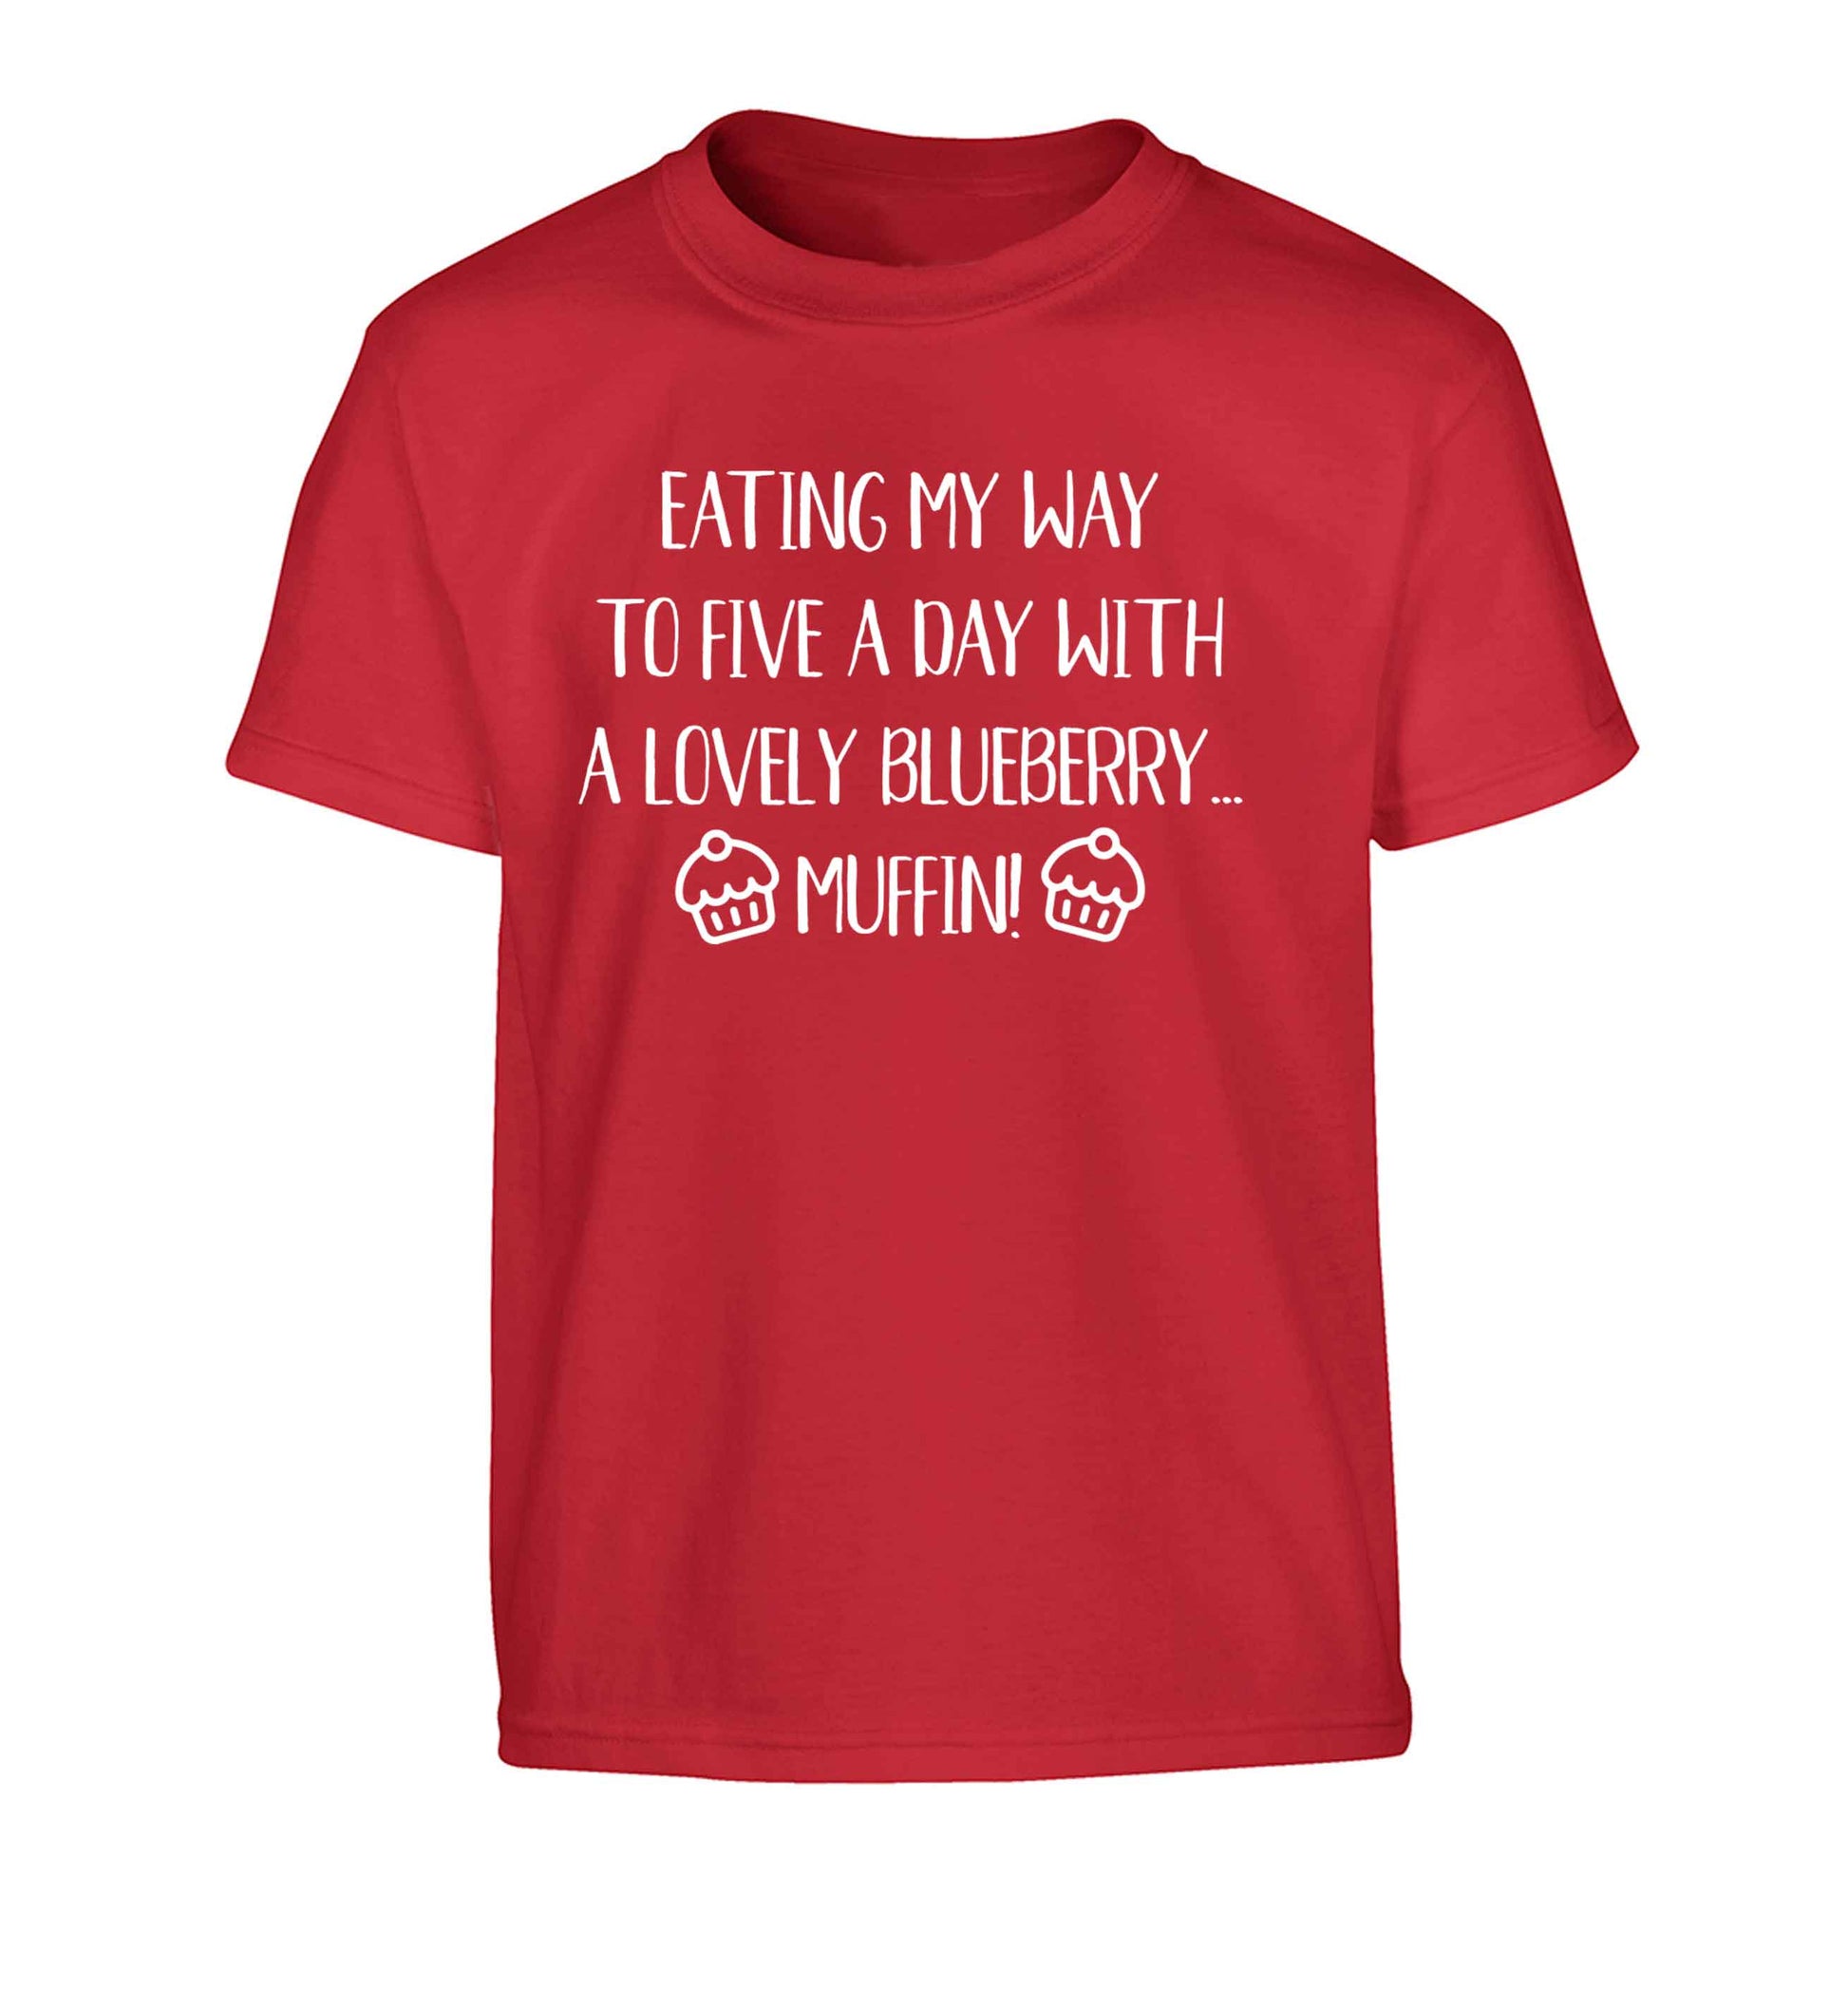 Eating my way to five a day with a lovely blueberry muffin Children's red Tshirt 12-13 Years